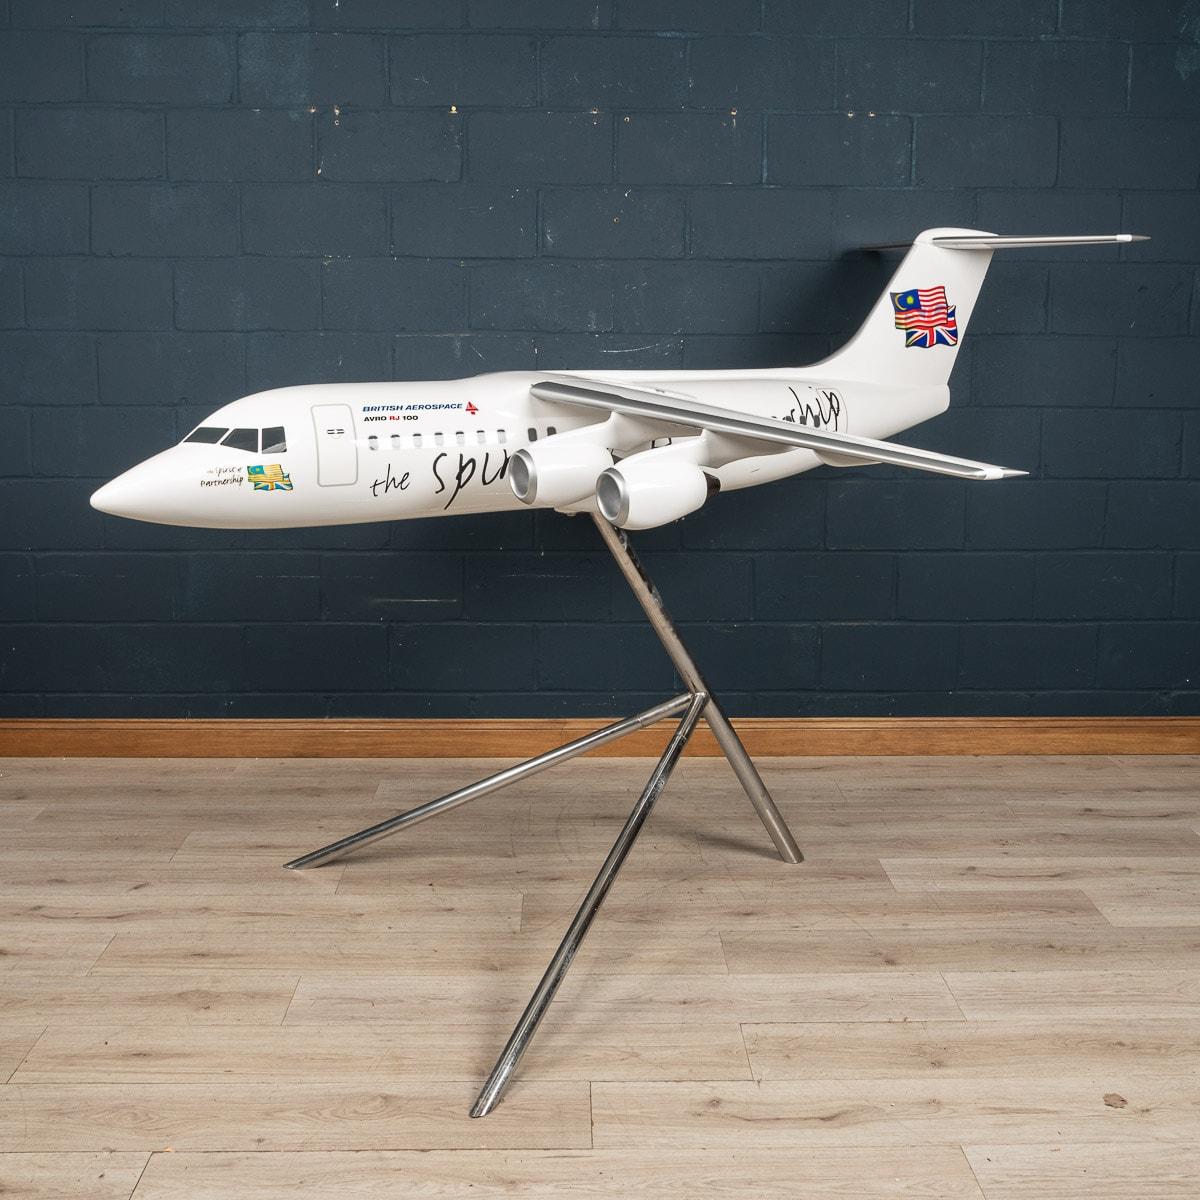 An massive and impressive boardroom model of a British Aerospace 146 /Avro RJ, made out of softwood and plaster or fibreglass and displayed on a purpose-built stand. Made in the mid 1990s, this imposing model was produced to commemorate the